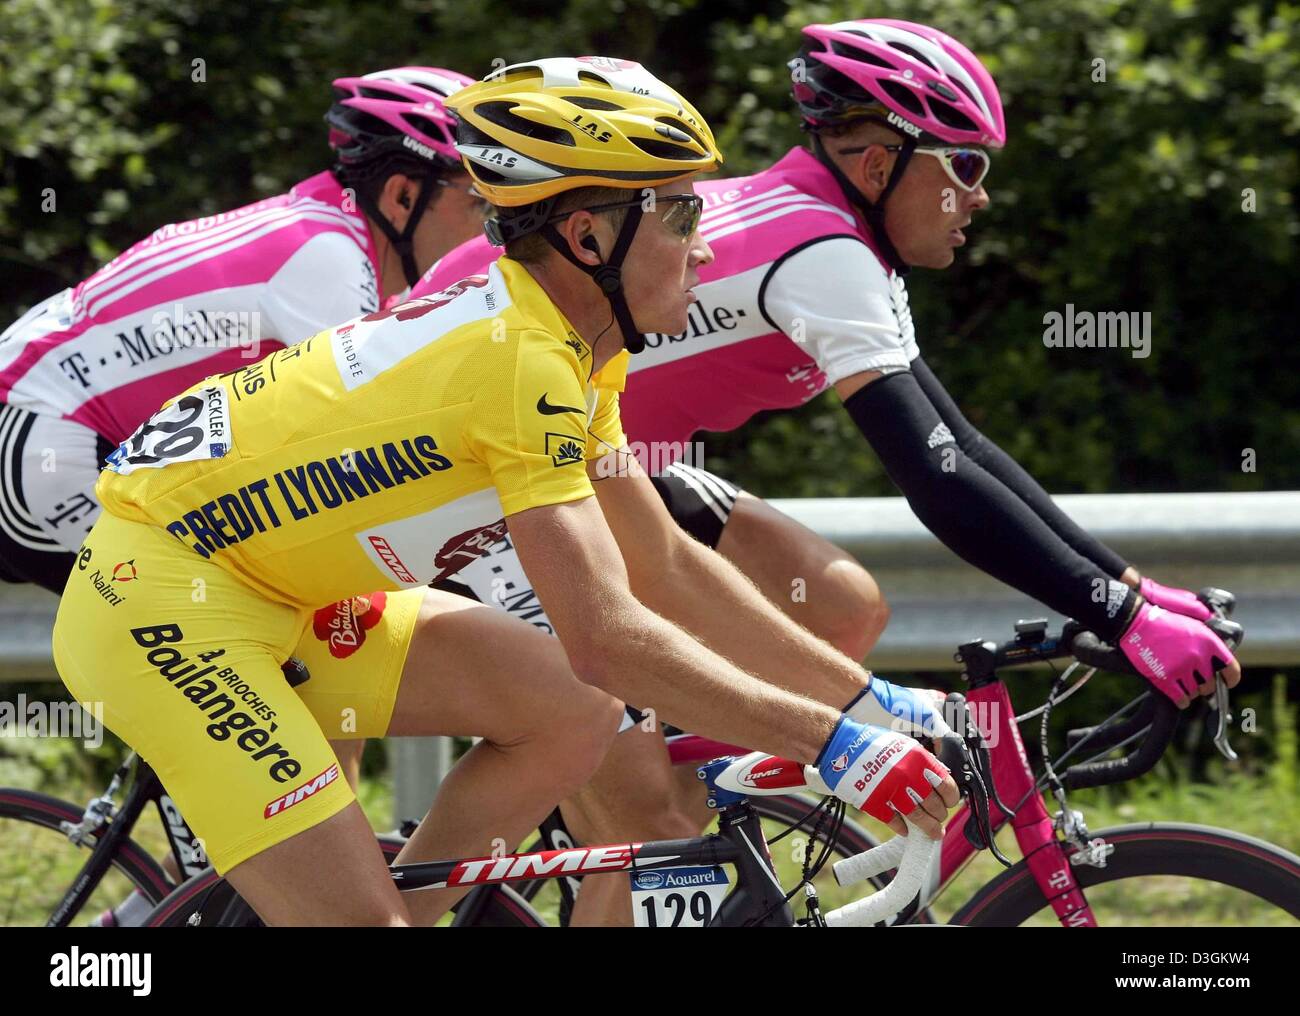 (dpa) - German cyclist Jan Ullrich (rear) of team T-Mobile rides next to French cyclist Thomas Voeckler (front) of team Brioches La Boulangere, who is wearing the yellow jersey of the overall leader, during the 9th stage of the Tour de France cycling race in France, 13 July 2004. The 160.5km long stage took the cyclists from Saint-Leonard-de-Noblat to Gueret. During the 10th stage  Stock Photo